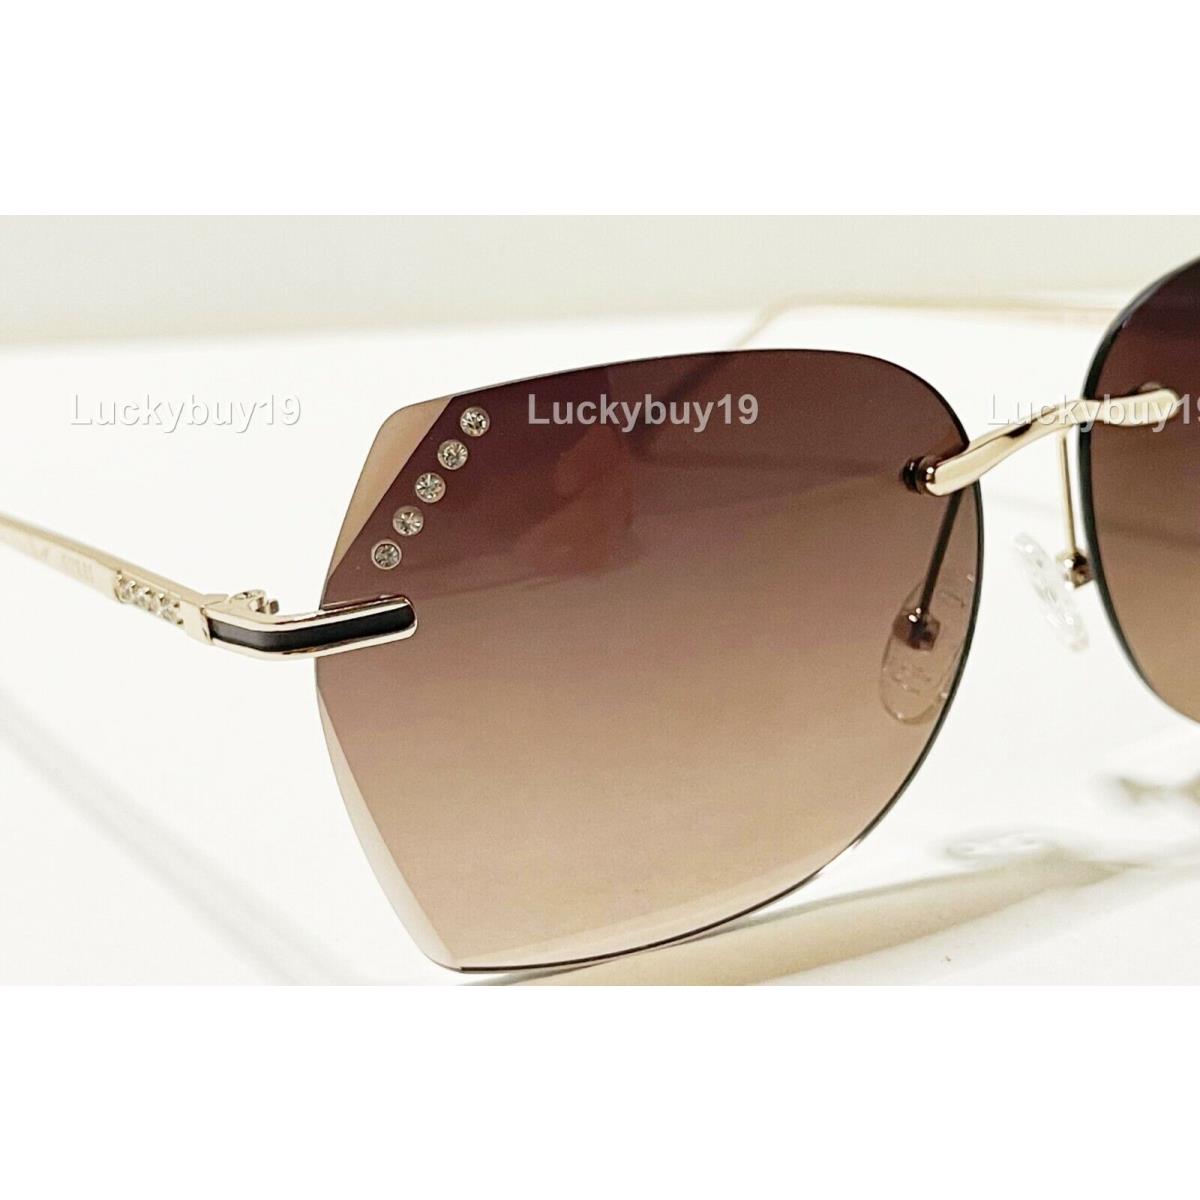 Guess sunglasses  - Gold Frame, Brown Lens 7